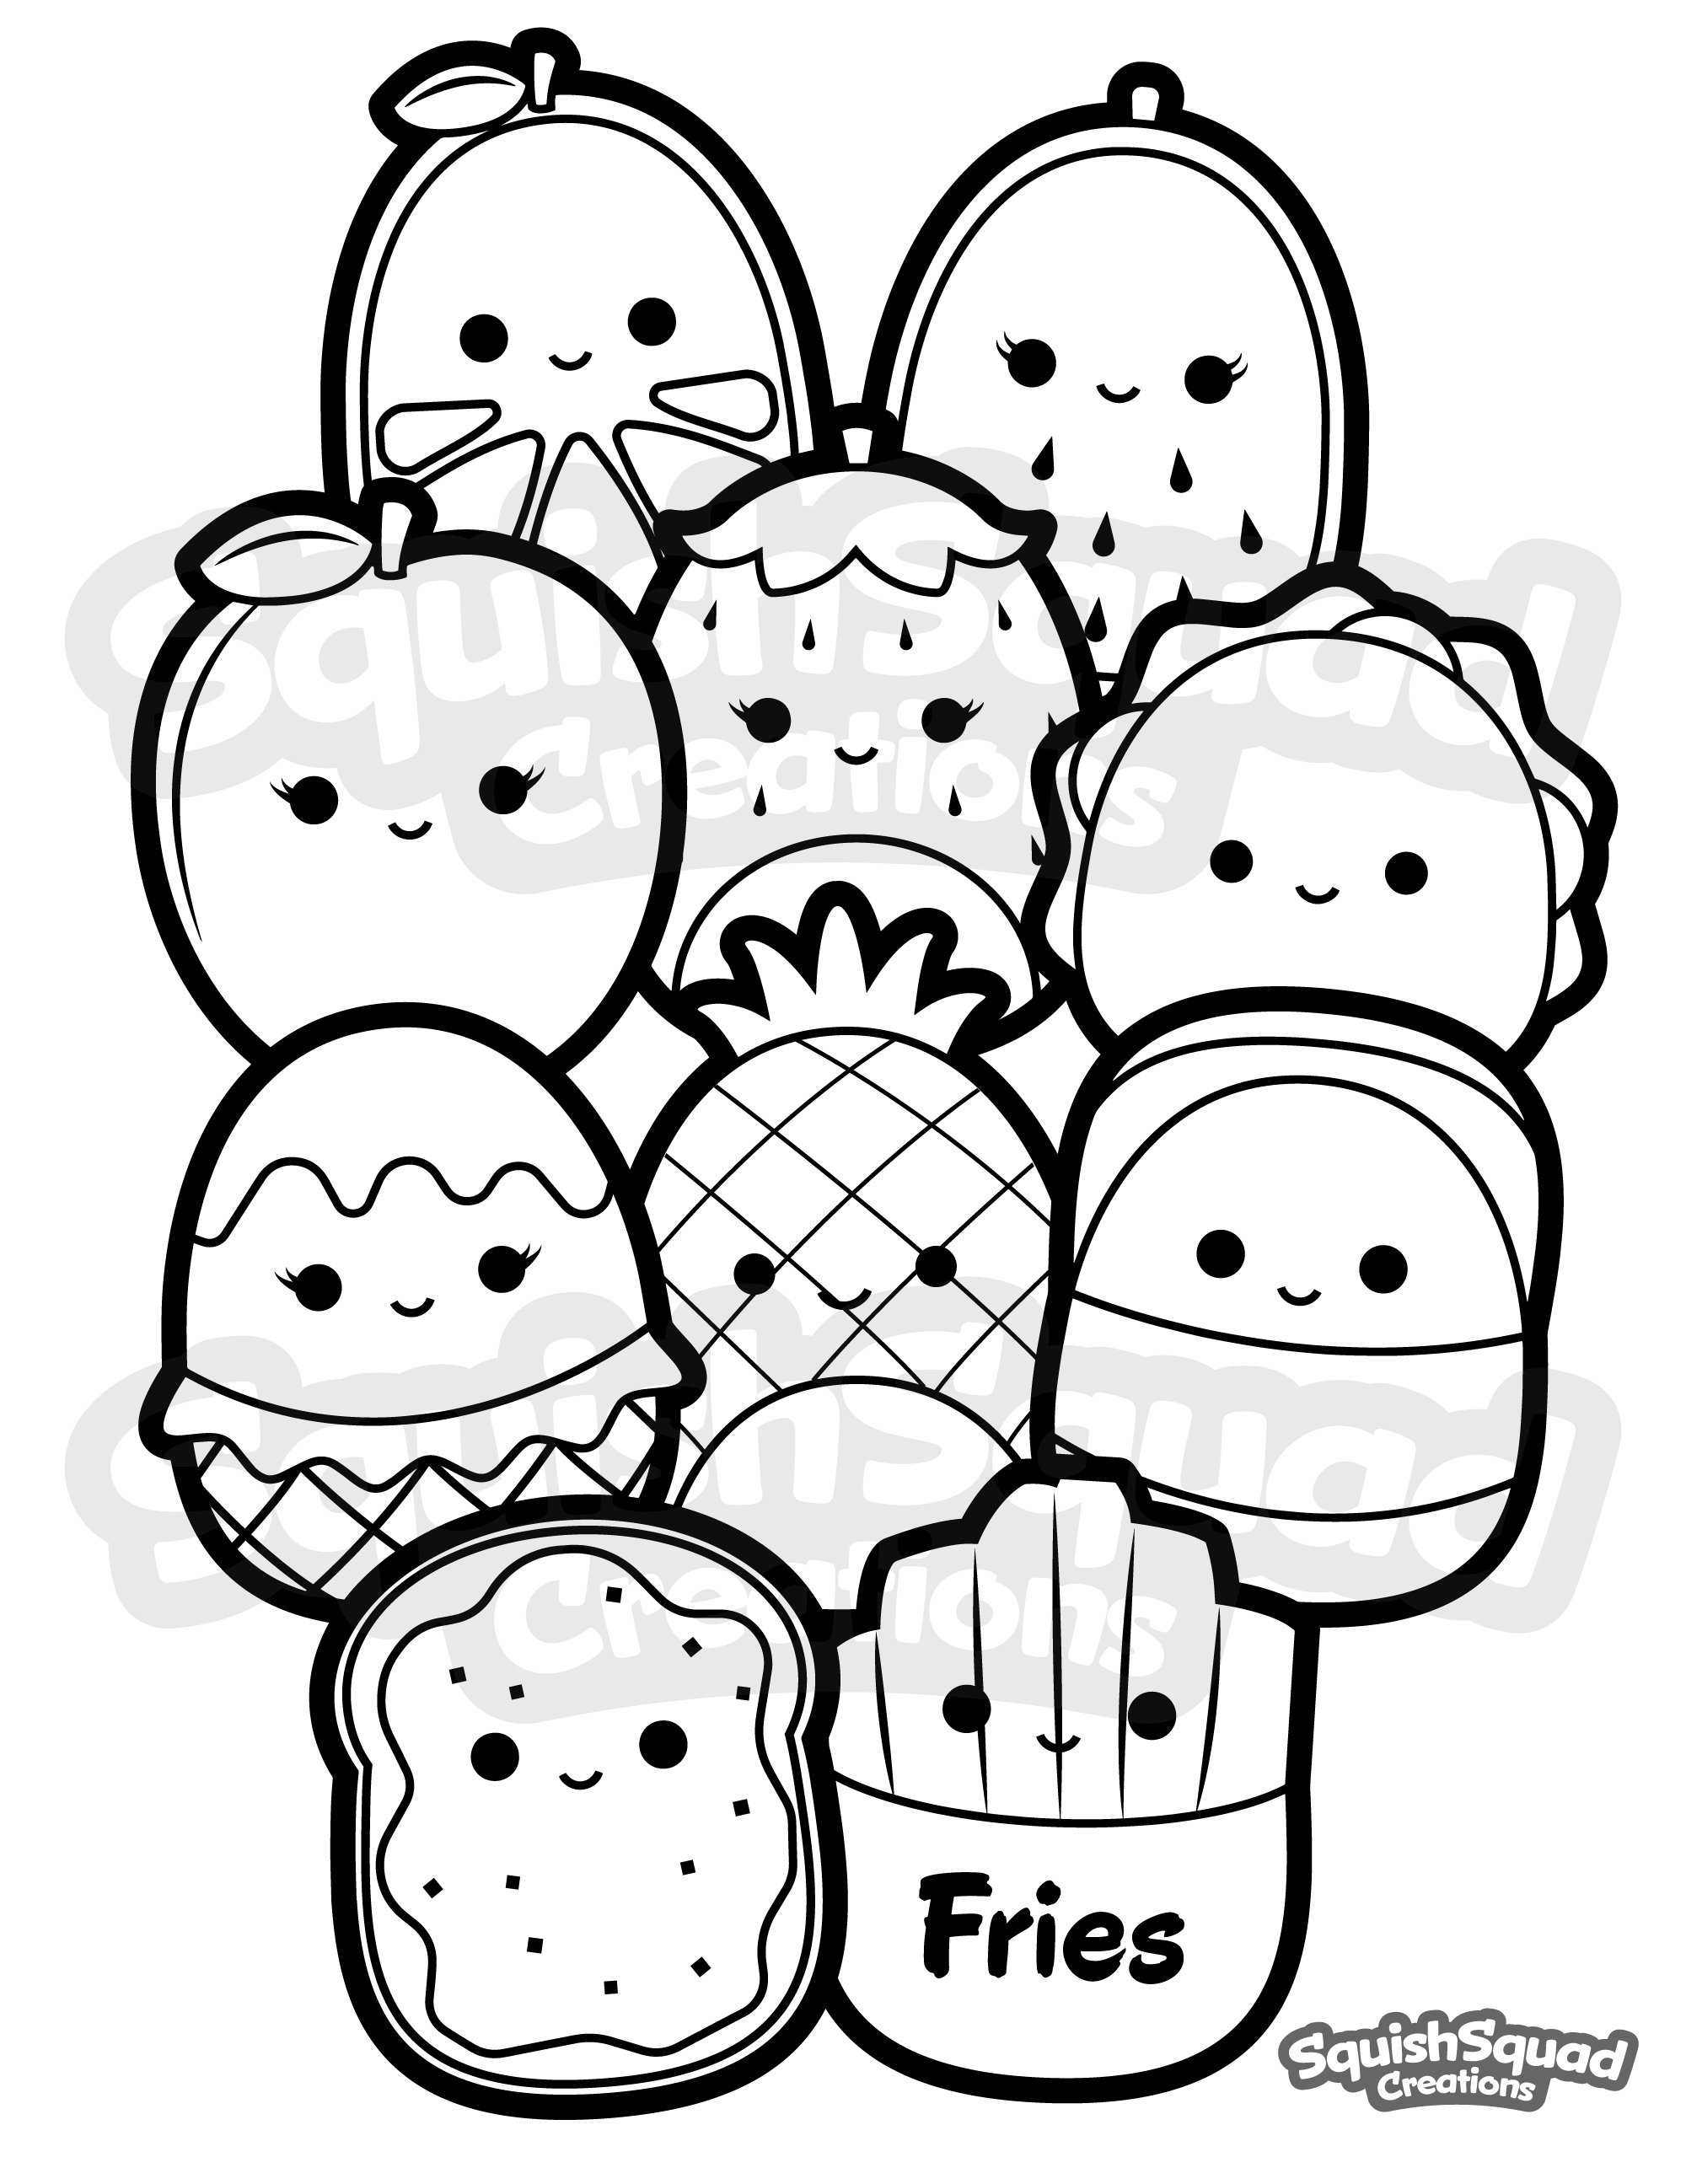 Squishmallow coloring page printable squishmallow coloring page squishmallow downloadable coloring sheet coloring page for kids